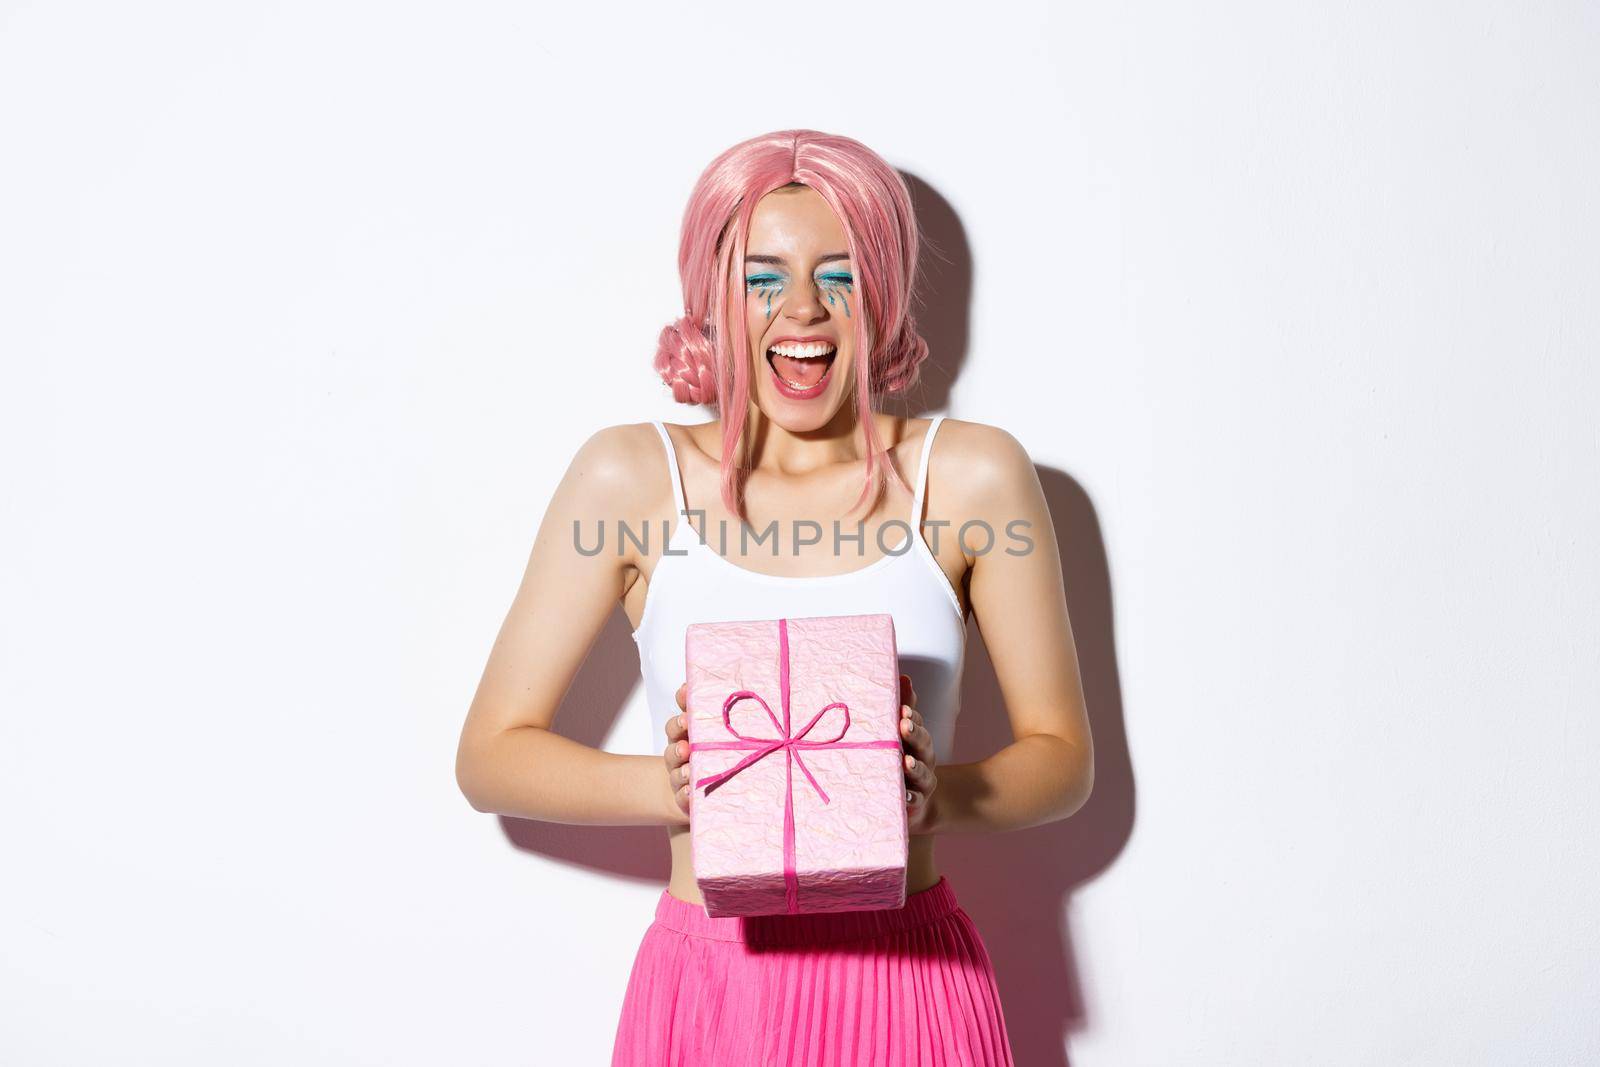 Cheerful birthday girl looking excited, wearing pink wig, shouting of joy, receiving bday gift, standing over white background and celebrating.